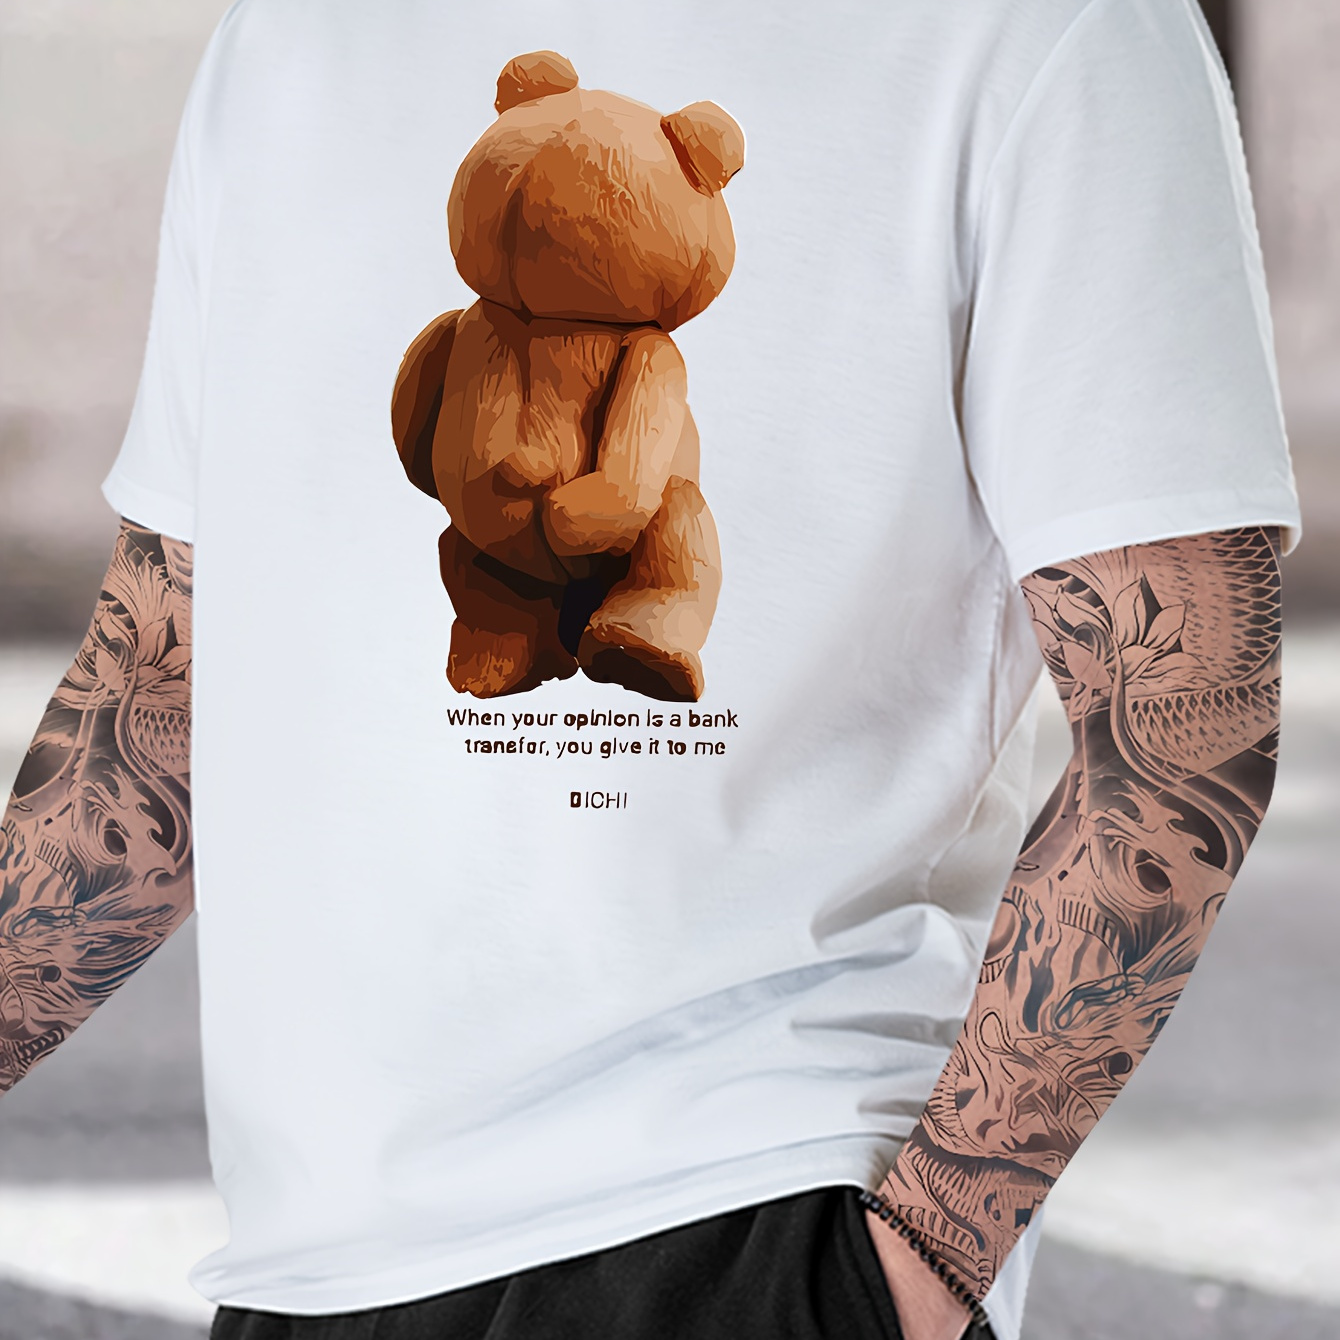 

Men's Teddy Bear Pattern And Letter Print T-shirt With Crew Neck And Short Sleeve, Tees For Men, Stylish And Funny Tops For Summer Outdoors Wear